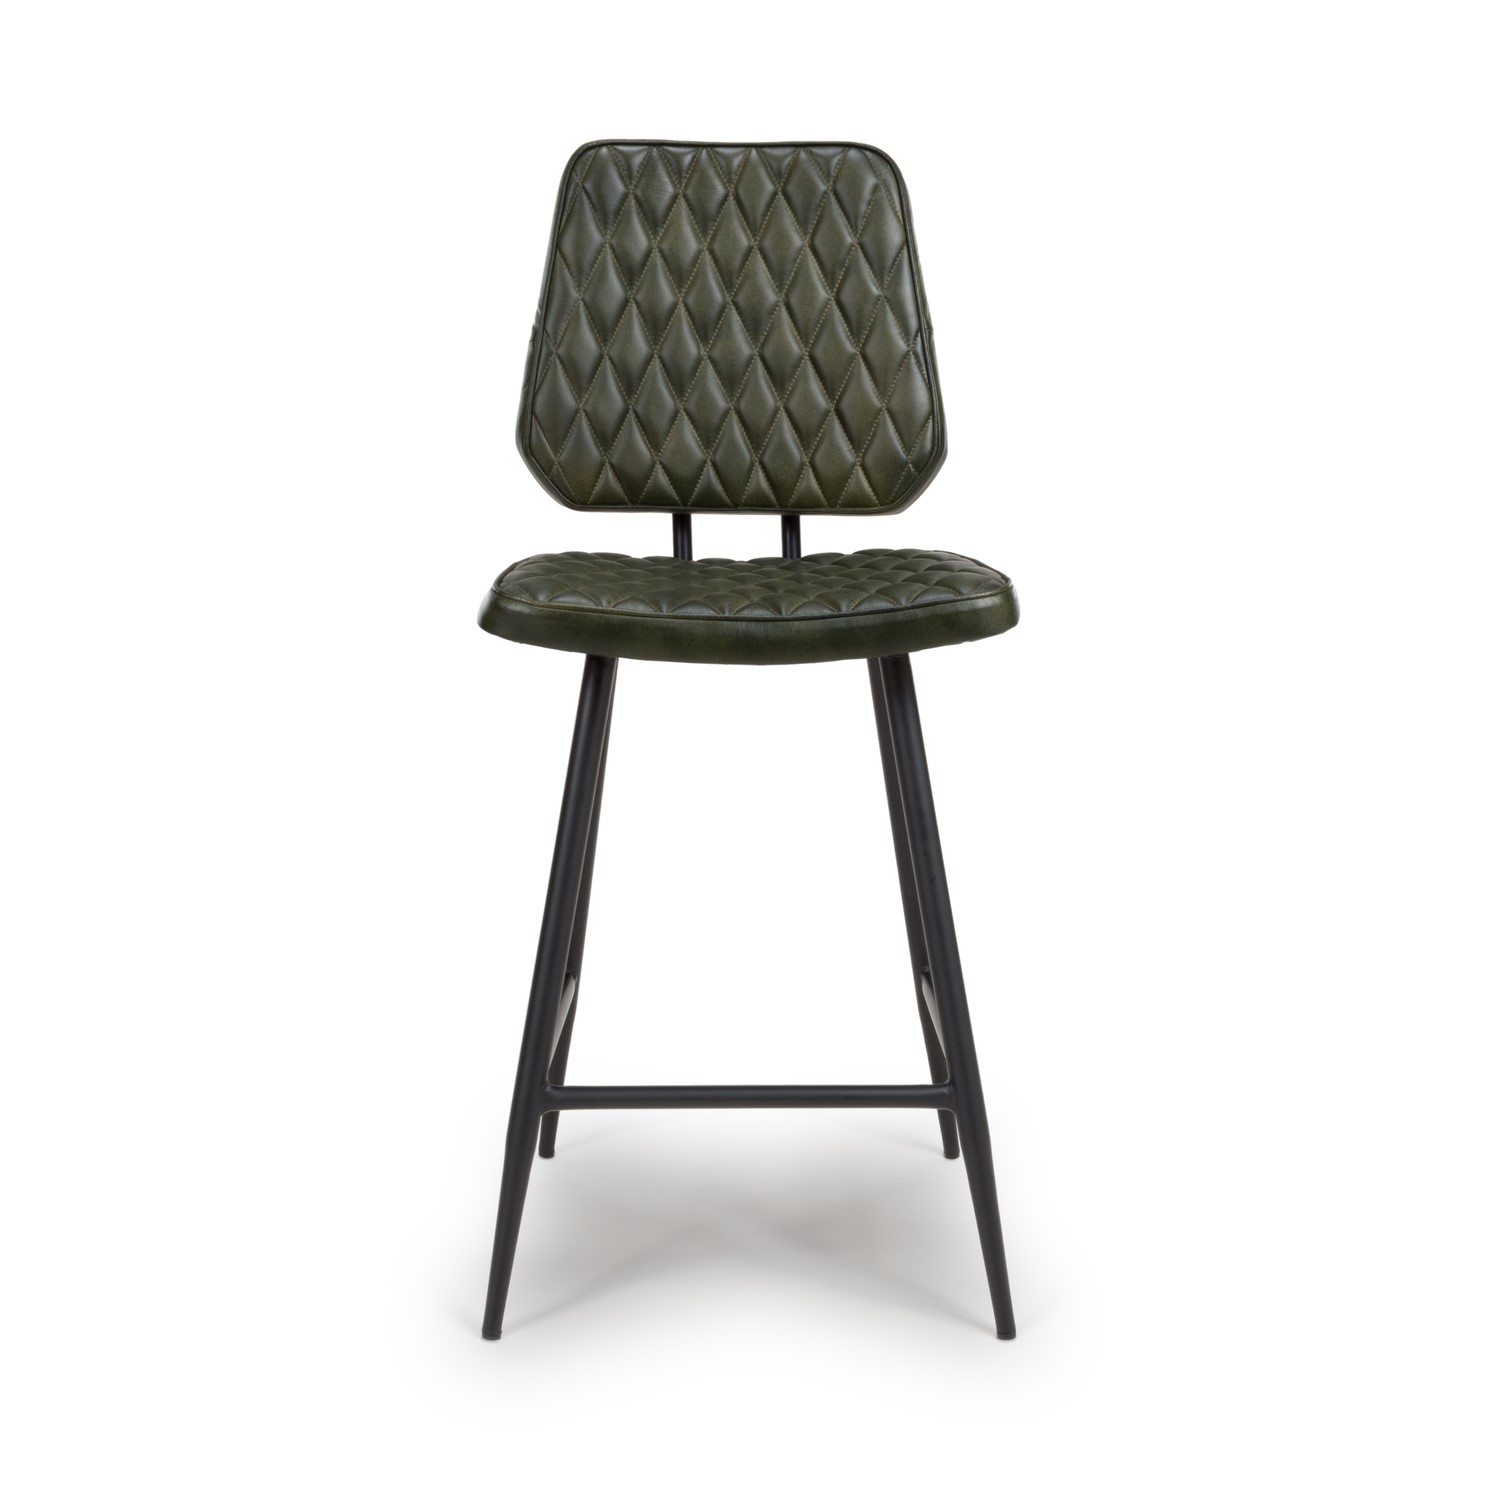 Read more about Set of 2 real leather green kitchen stools with quilted back aiden